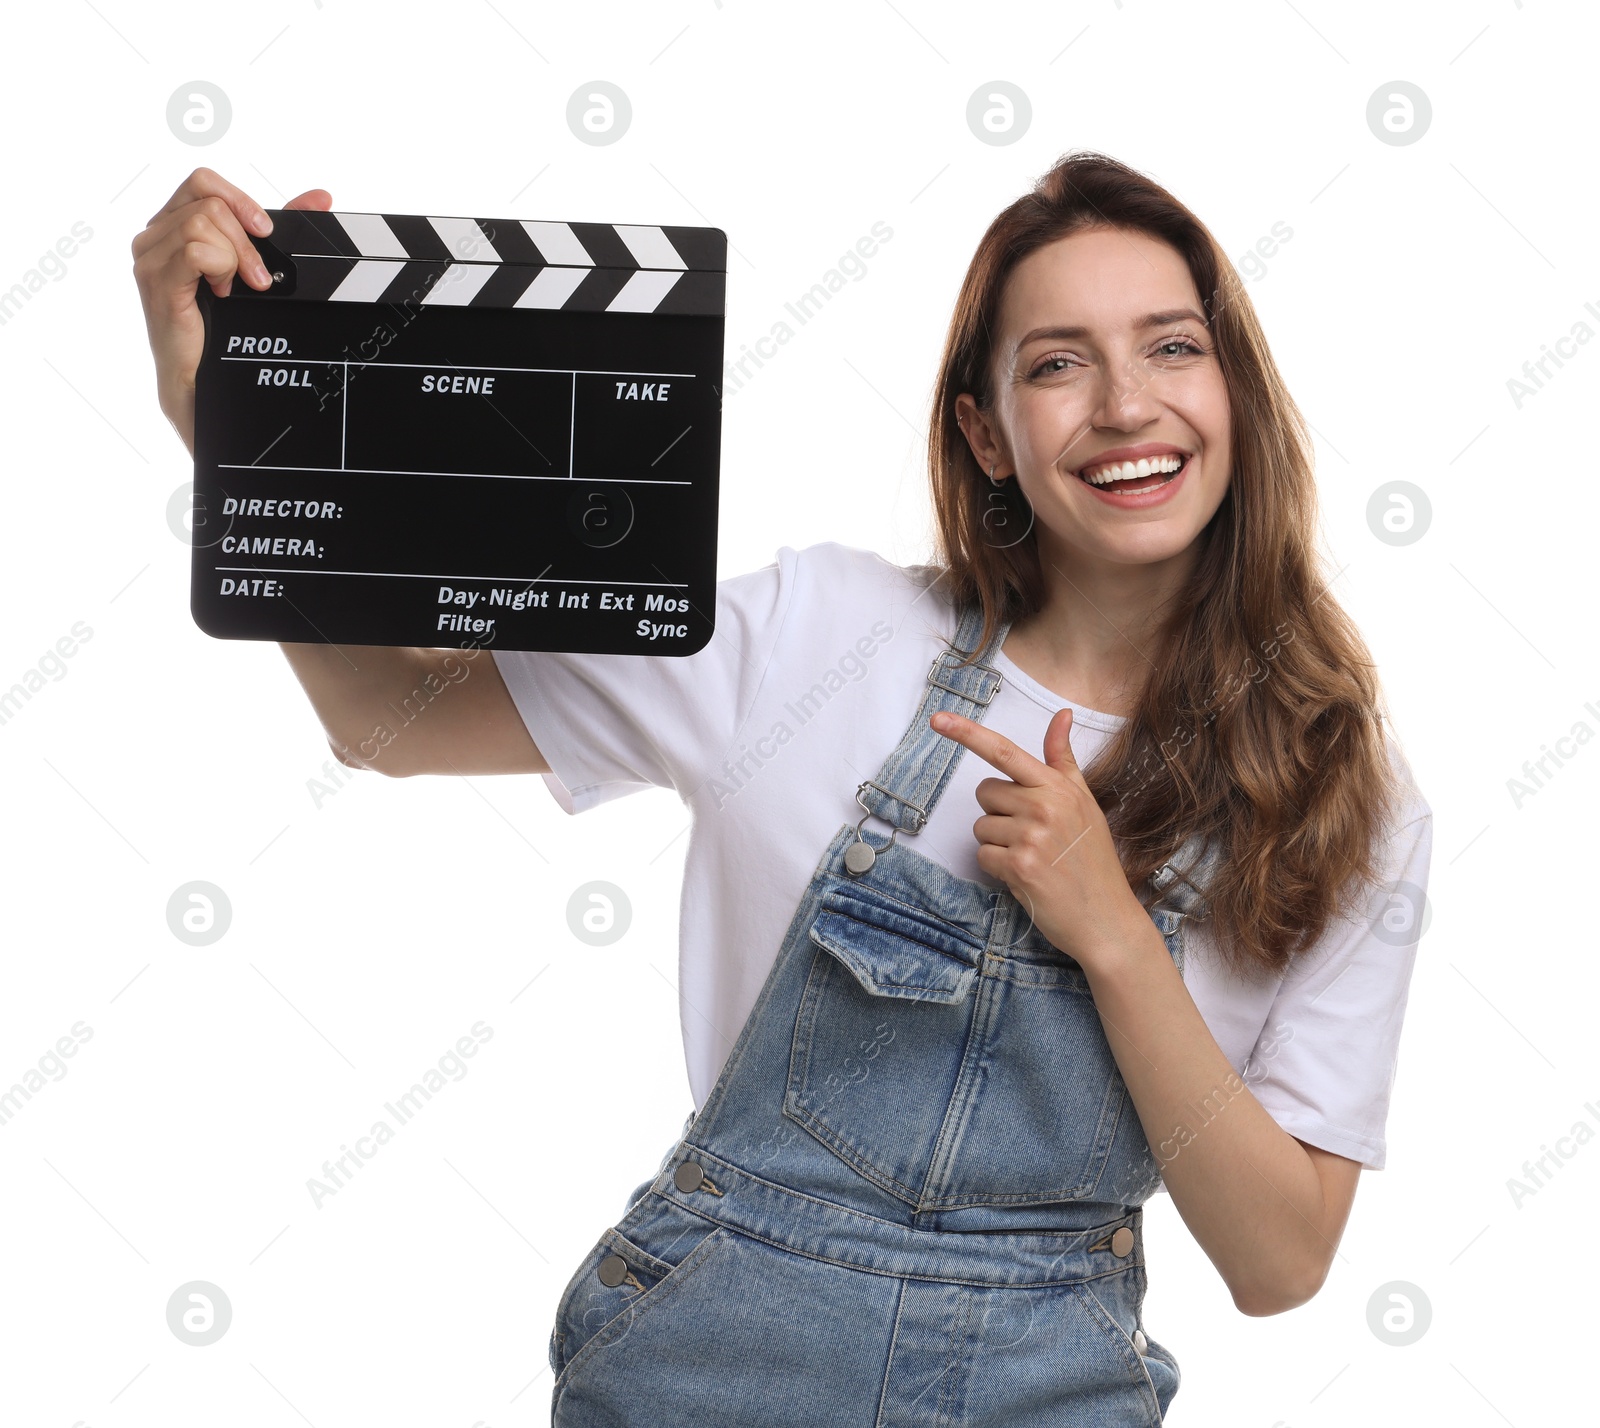 Photo of Making movie. Smiling woman pointing at clapperboard on white background